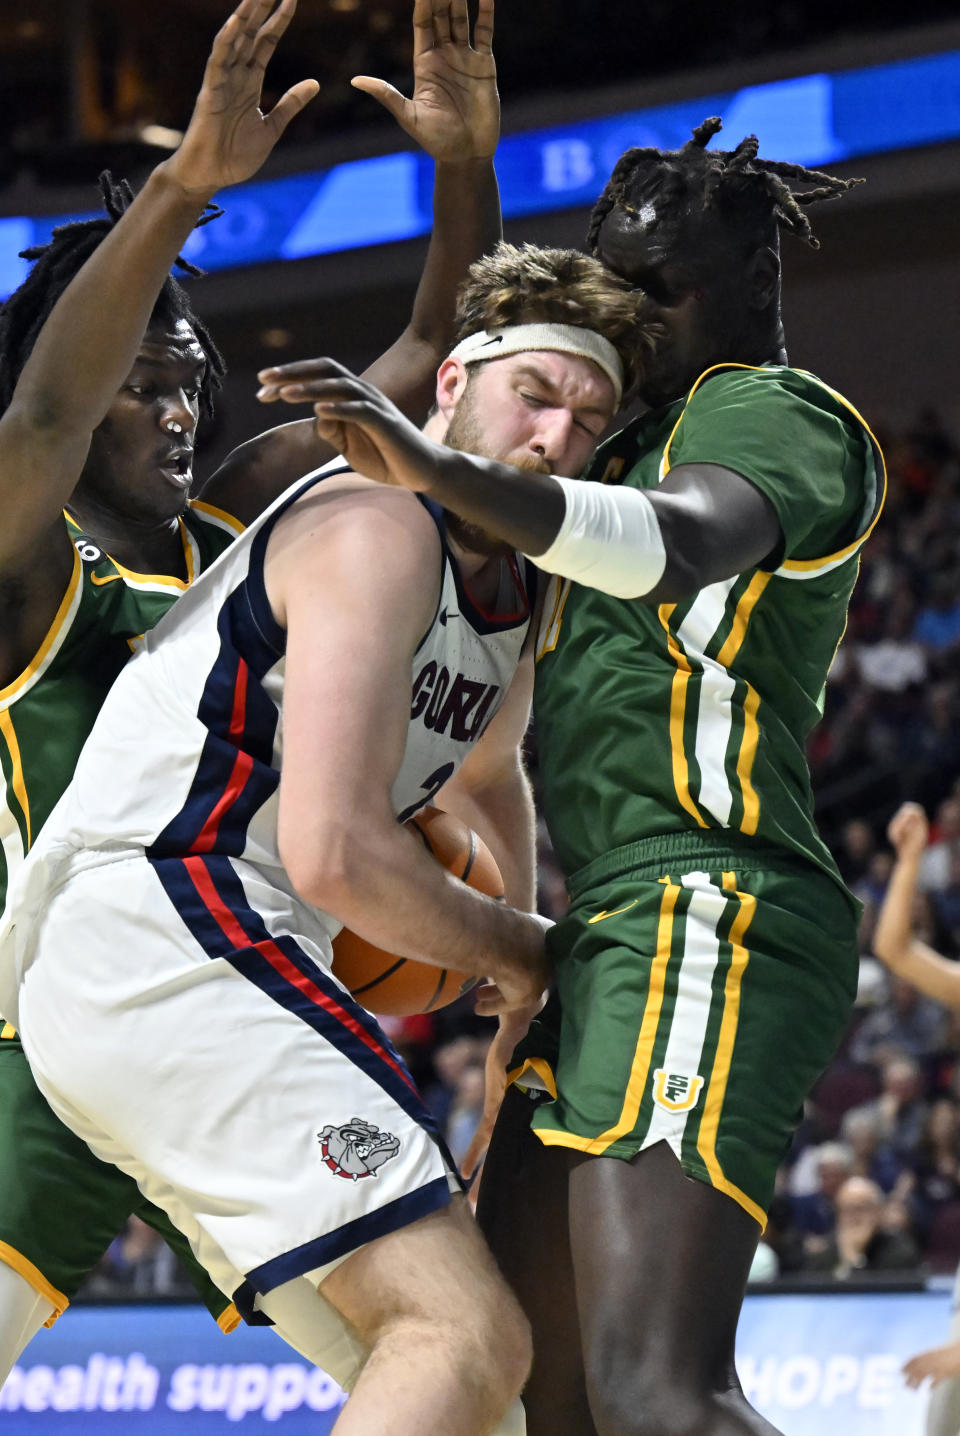 Gonzaga forward Drew Timme, center, collides with San Francisco forward Josh Kunen, right, as forward Ndewedo Newbury defends during the second half of an NCAA college basketball game in the semifinals of the West Coast Conference men's tournament Monday, March 6, 2023, in Las Vegas. (AP Photo/David Becker)